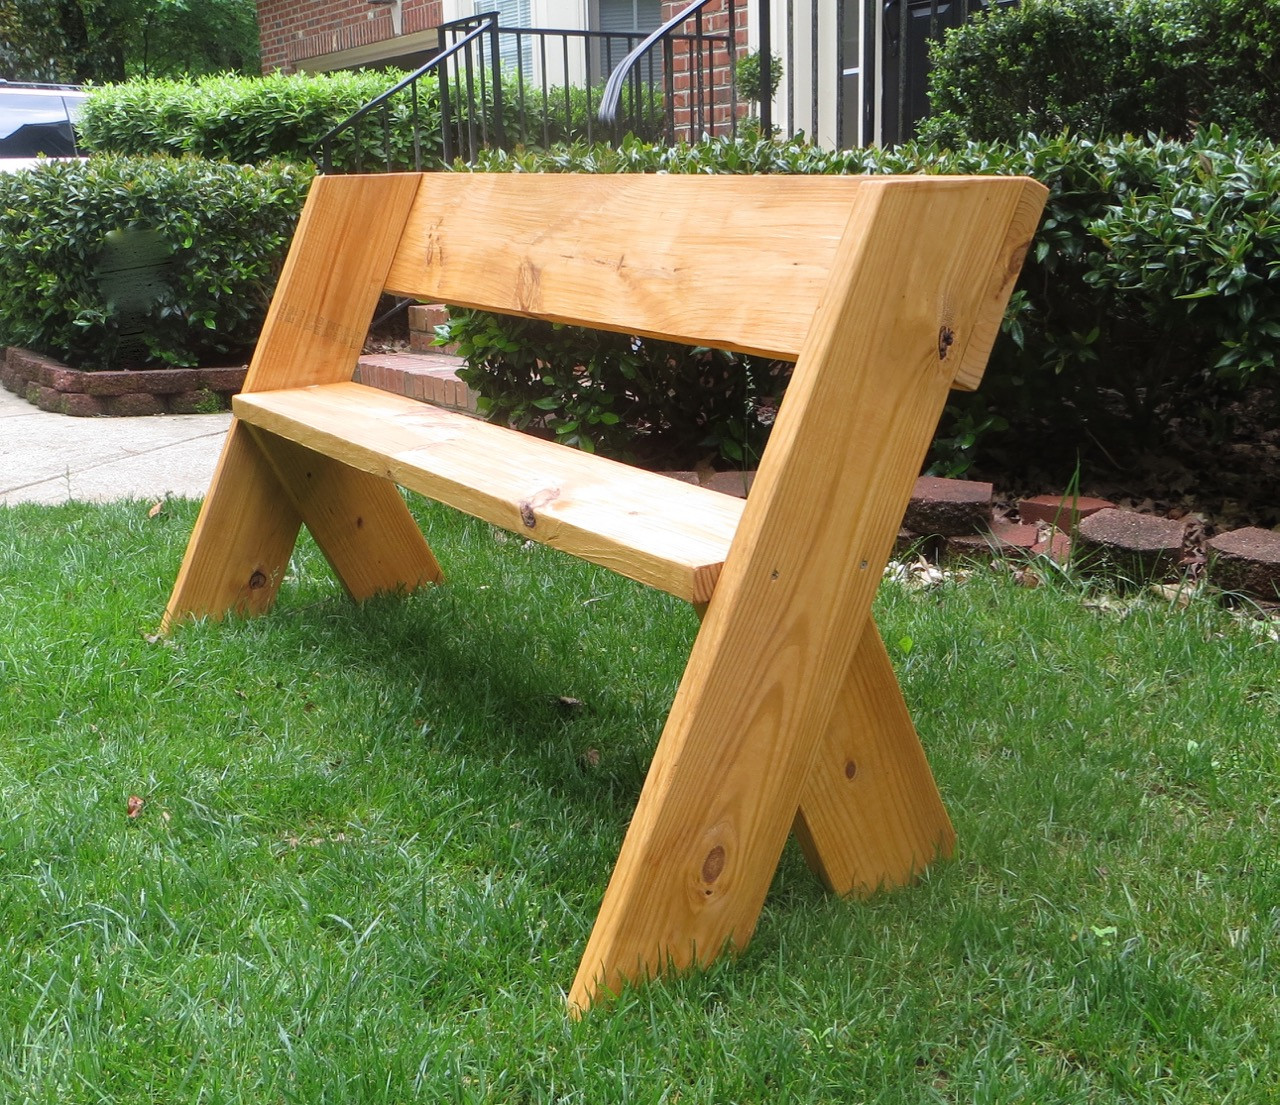 DIY Outdoor Bench With Back
 The Project Lady DIY Tutorial – $16 Simple Outdoor Wood